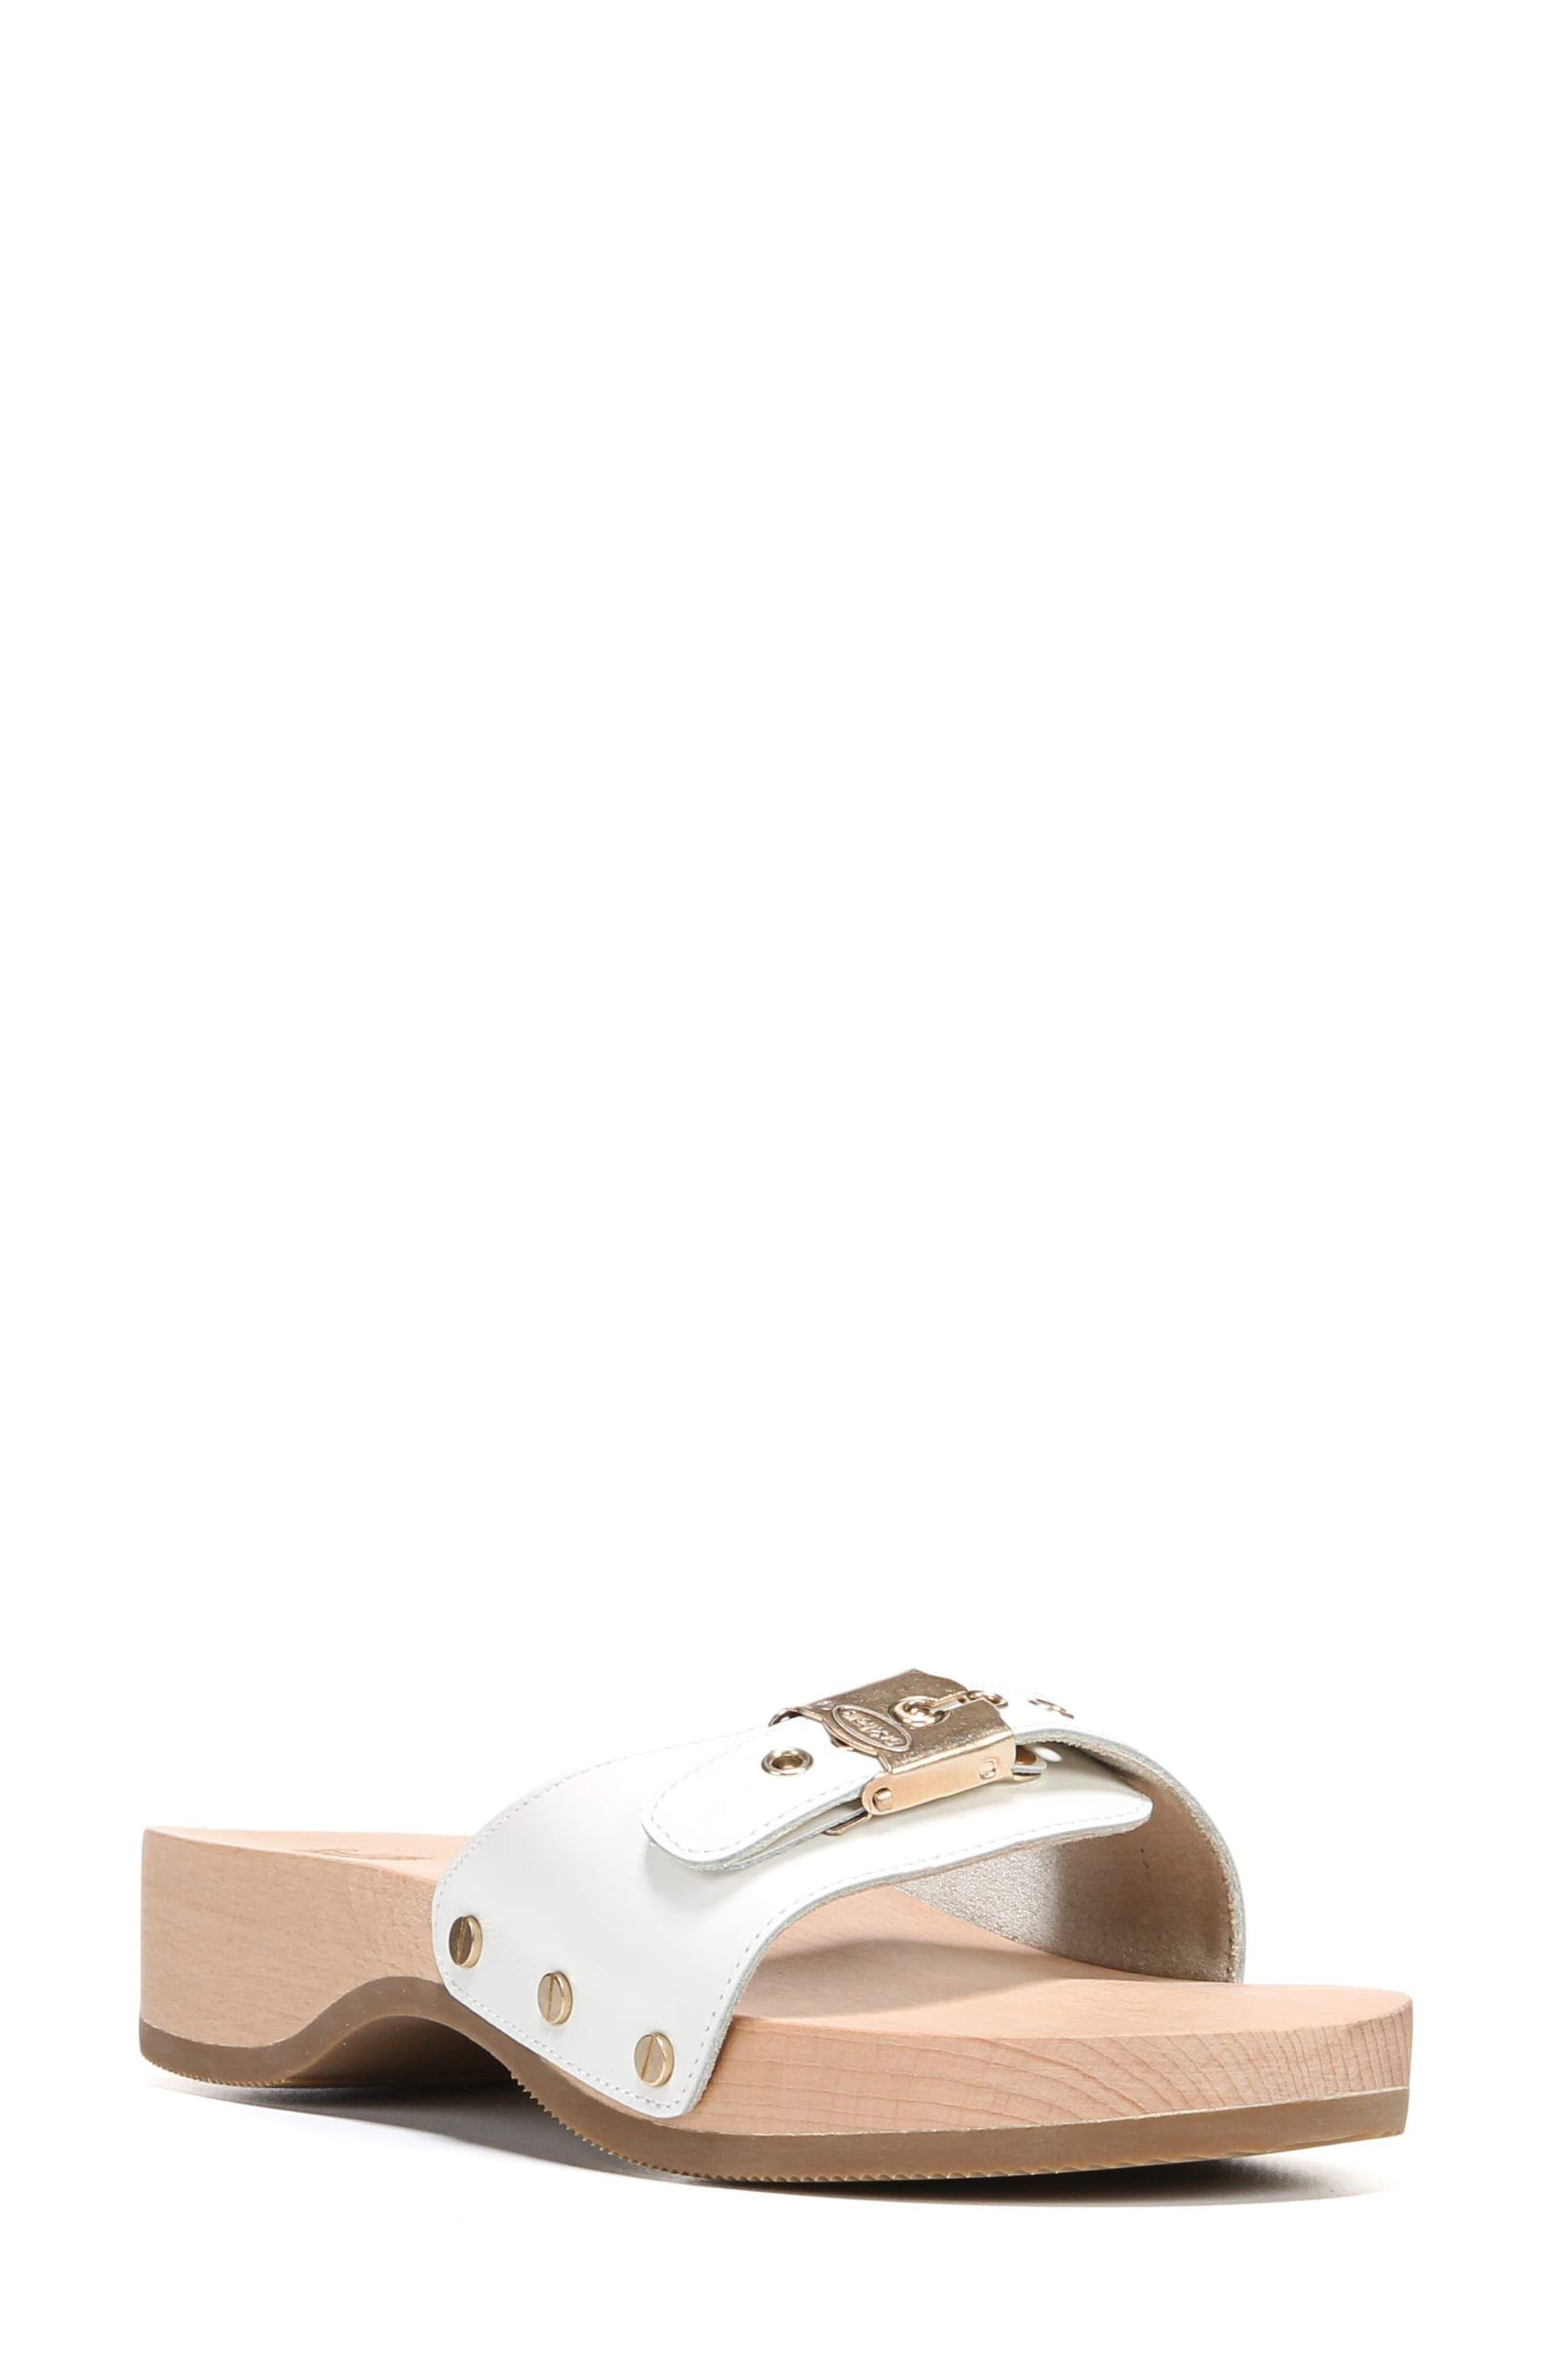 Dr. Scholls Original Collection Sandal in White | Lyst